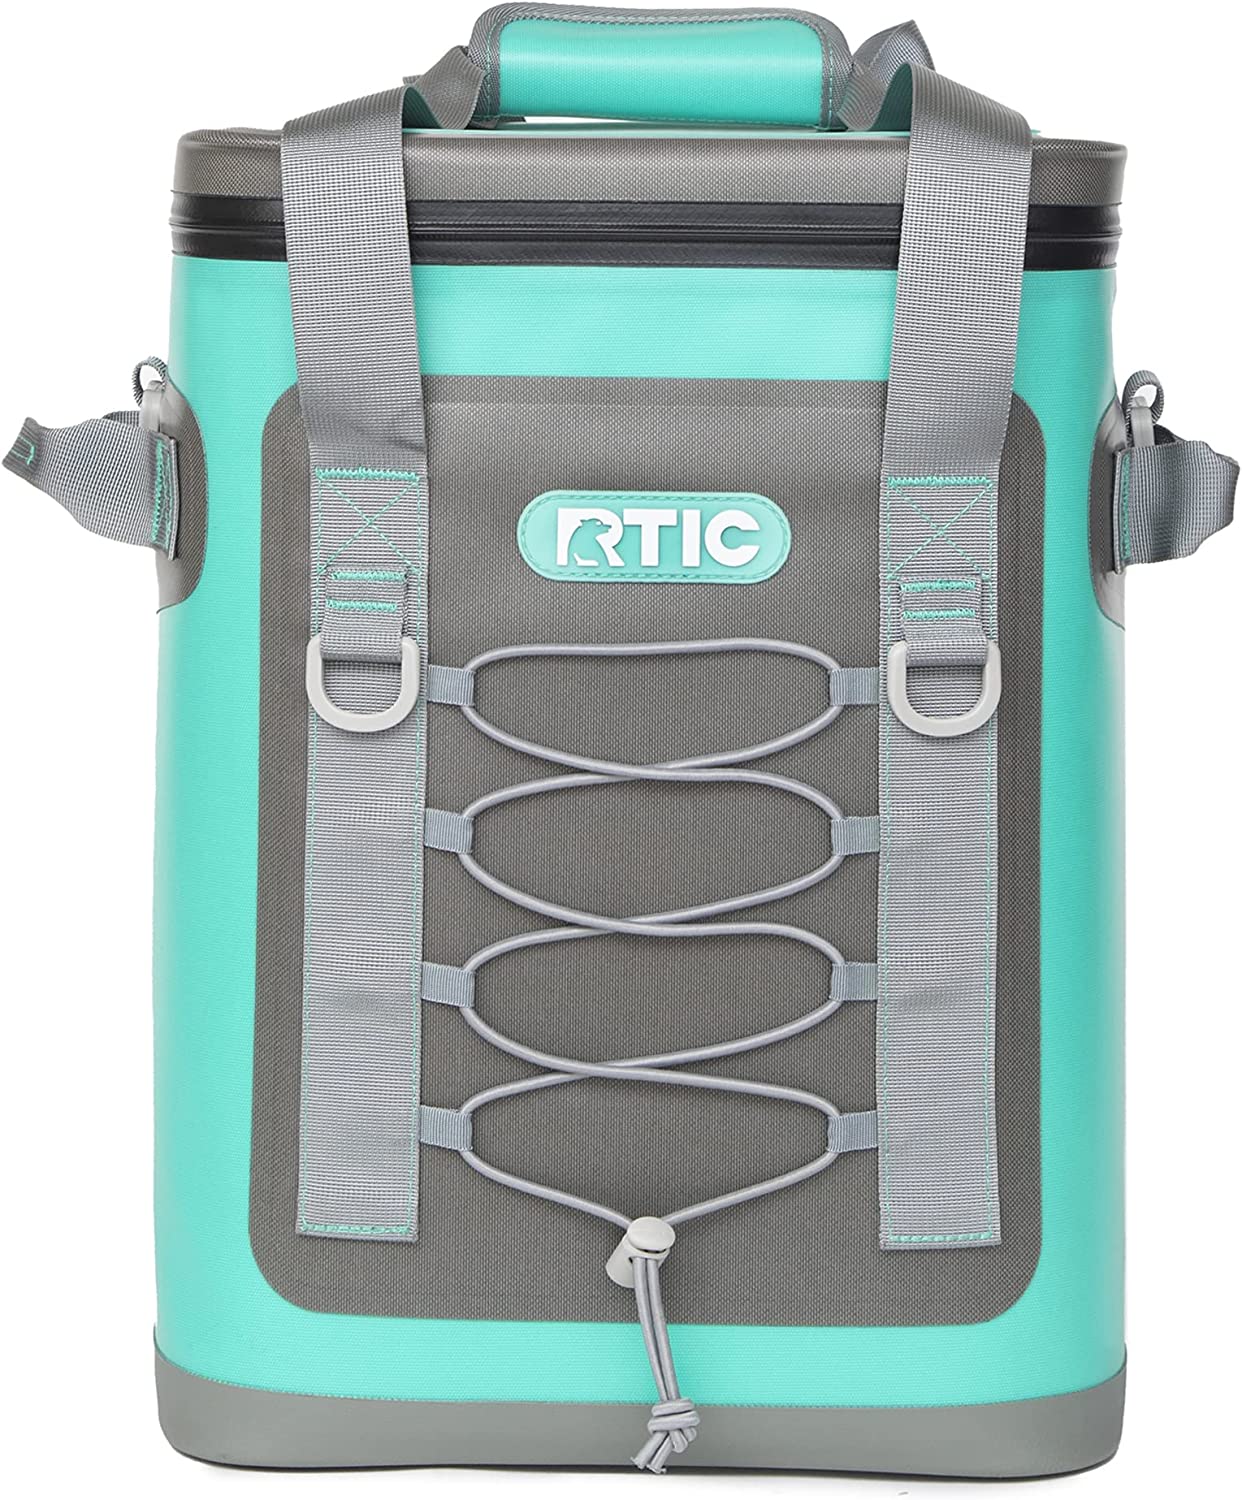 RTIC Backpack Cooler Insulated Portable Soft Cooler Bag Waterproof for Ice, Lunch, Beach, Drink, Beverage, Travel, Camping, Picnic, Car, Hiking - Gray